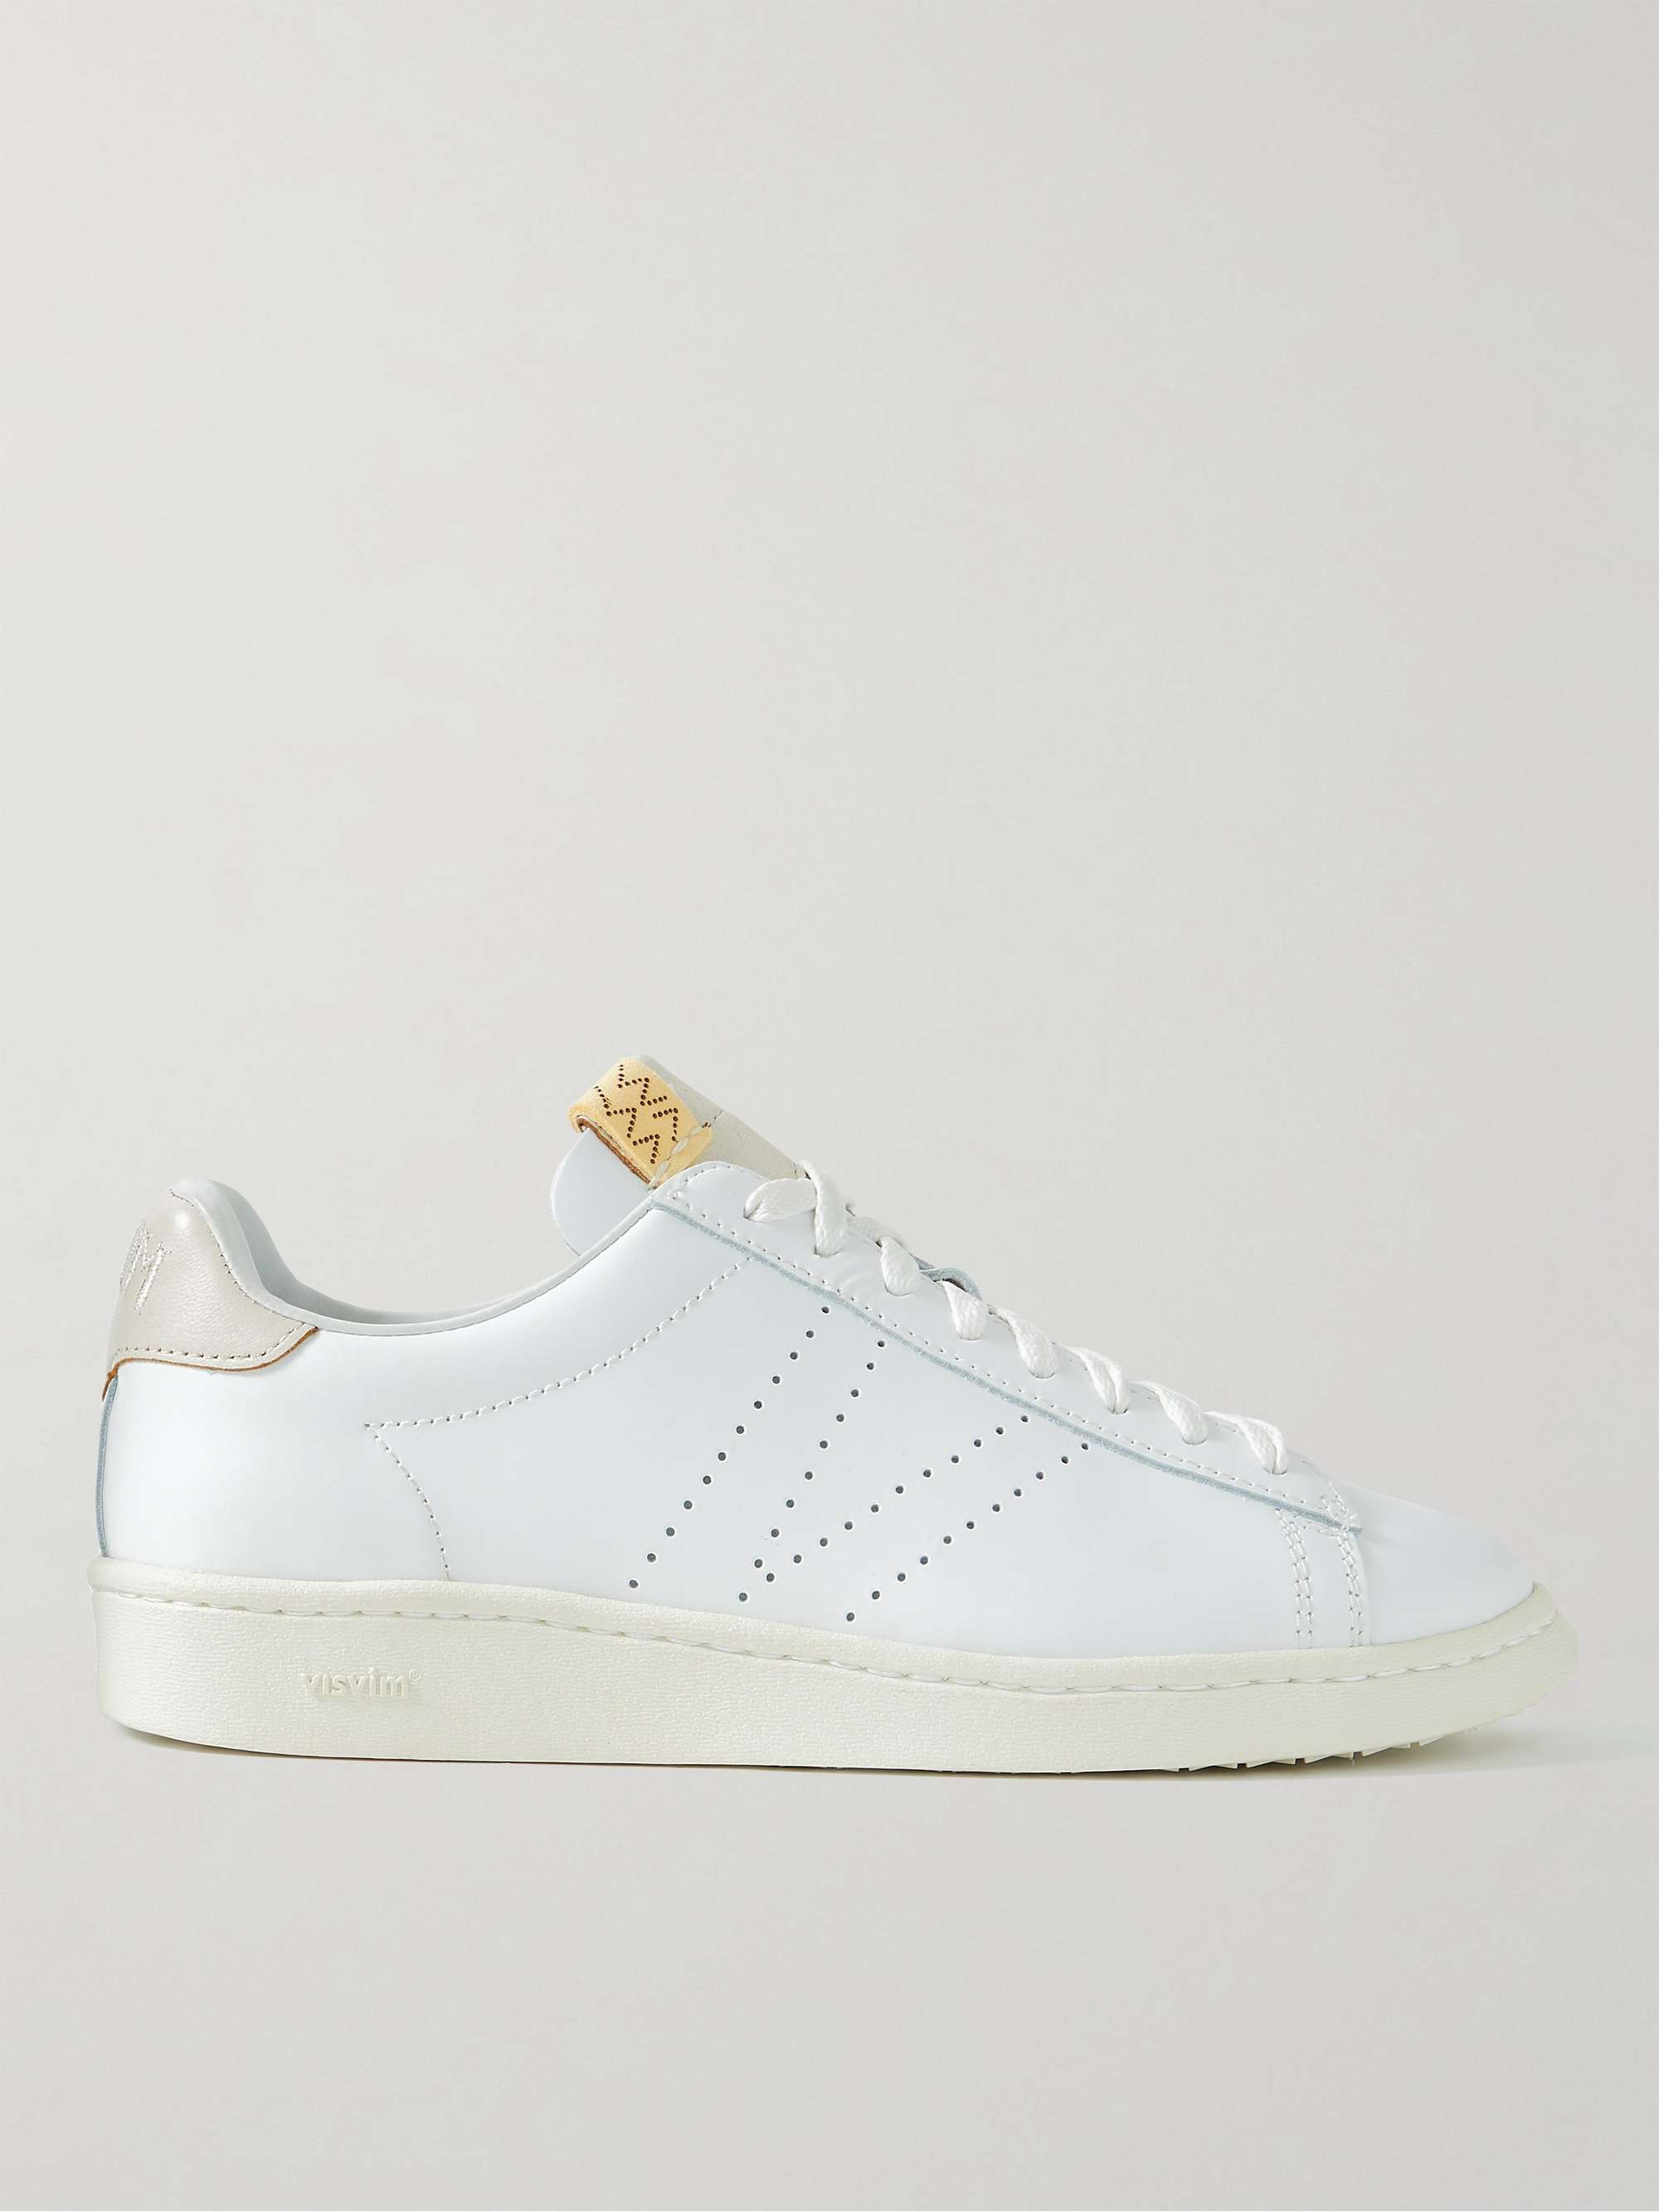 Corda-Folk Perforated Leather Sneakers